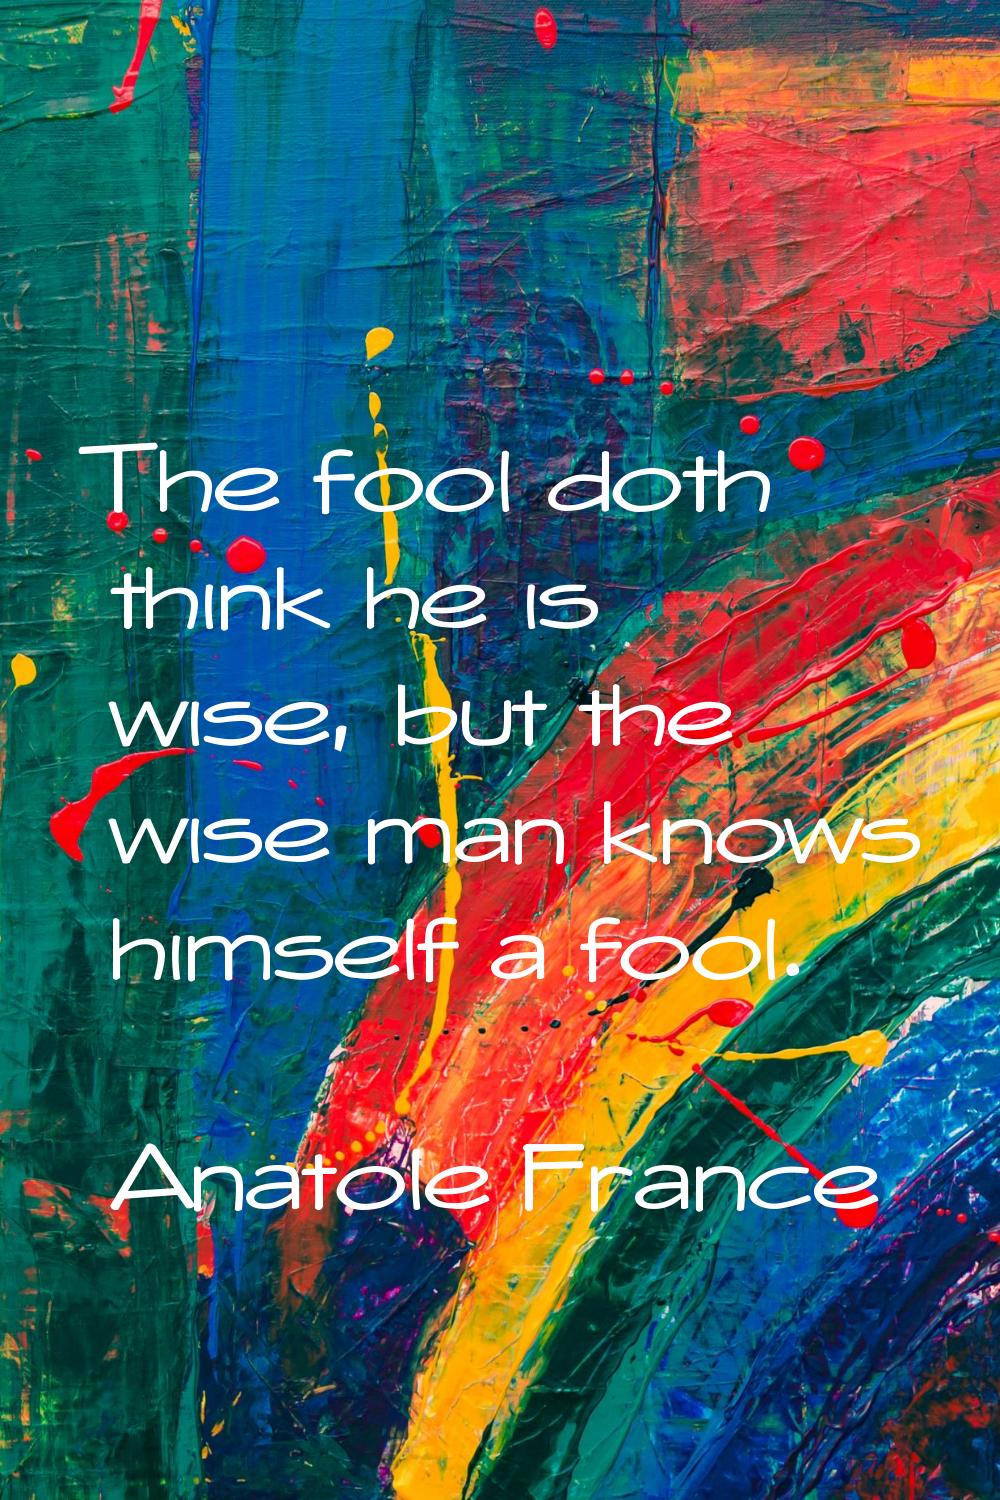 The fool doth think he is wise, but the wise man knows himself a fool.